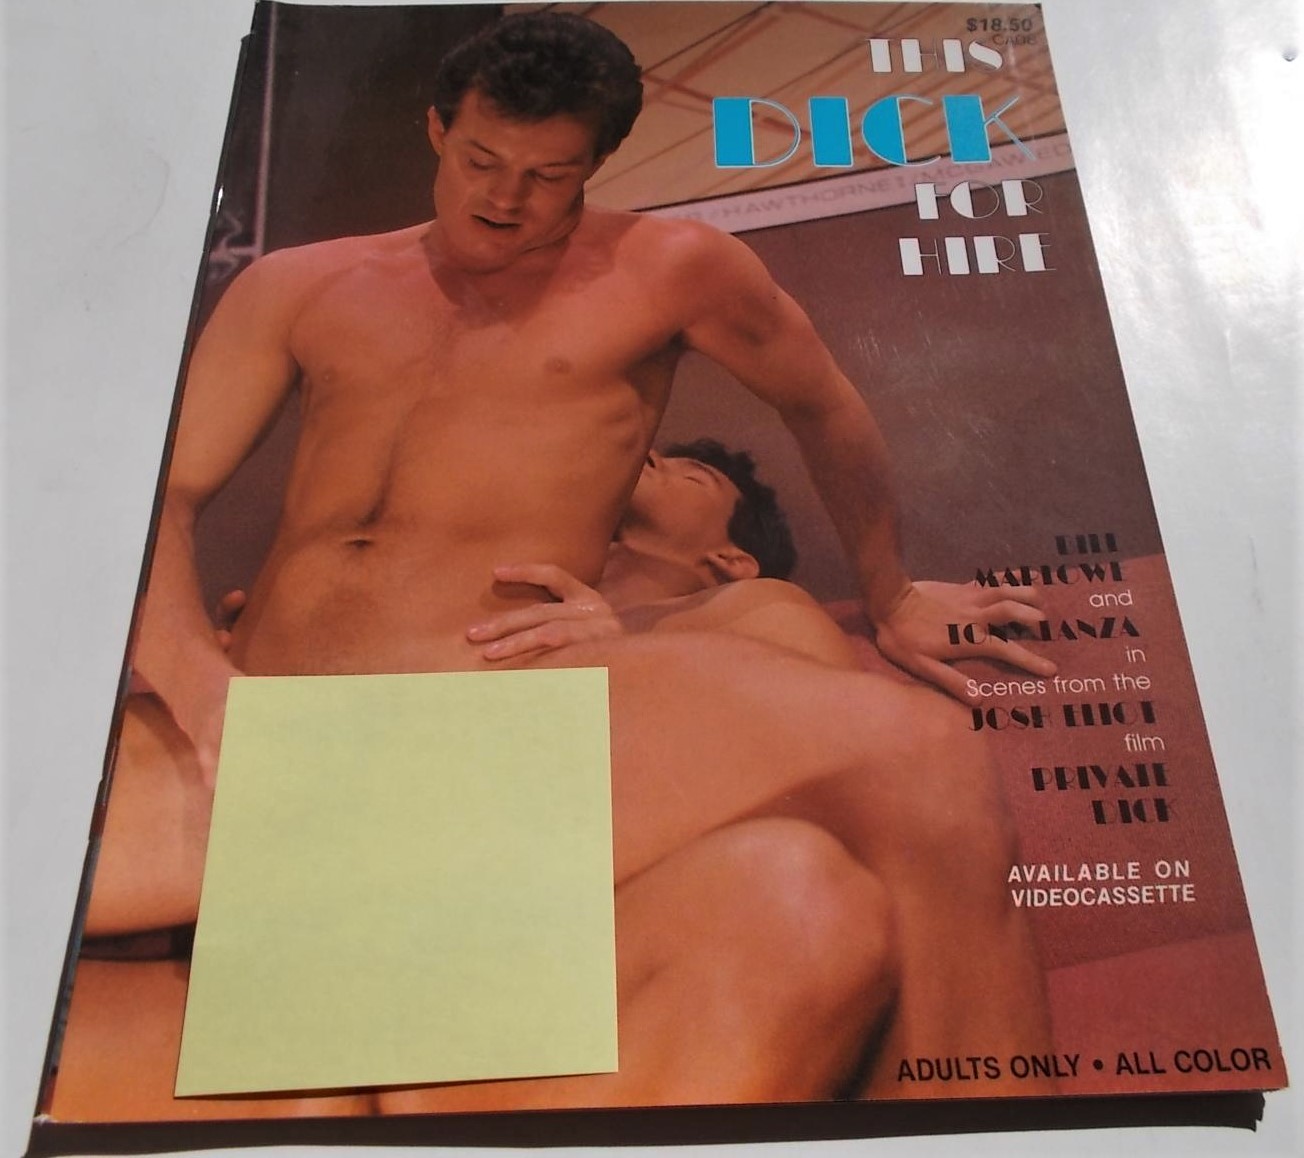 Catalina Video Presents THIS DICK FOR HIRE Featuring Scenes From the Josh  Eliot Film PRIVATE DICK (Gay Male Porn Adult Erotic Magazine) by Gourmet  Editions and Catalina Video: (1990) First Edition  Magazine / Periodical |